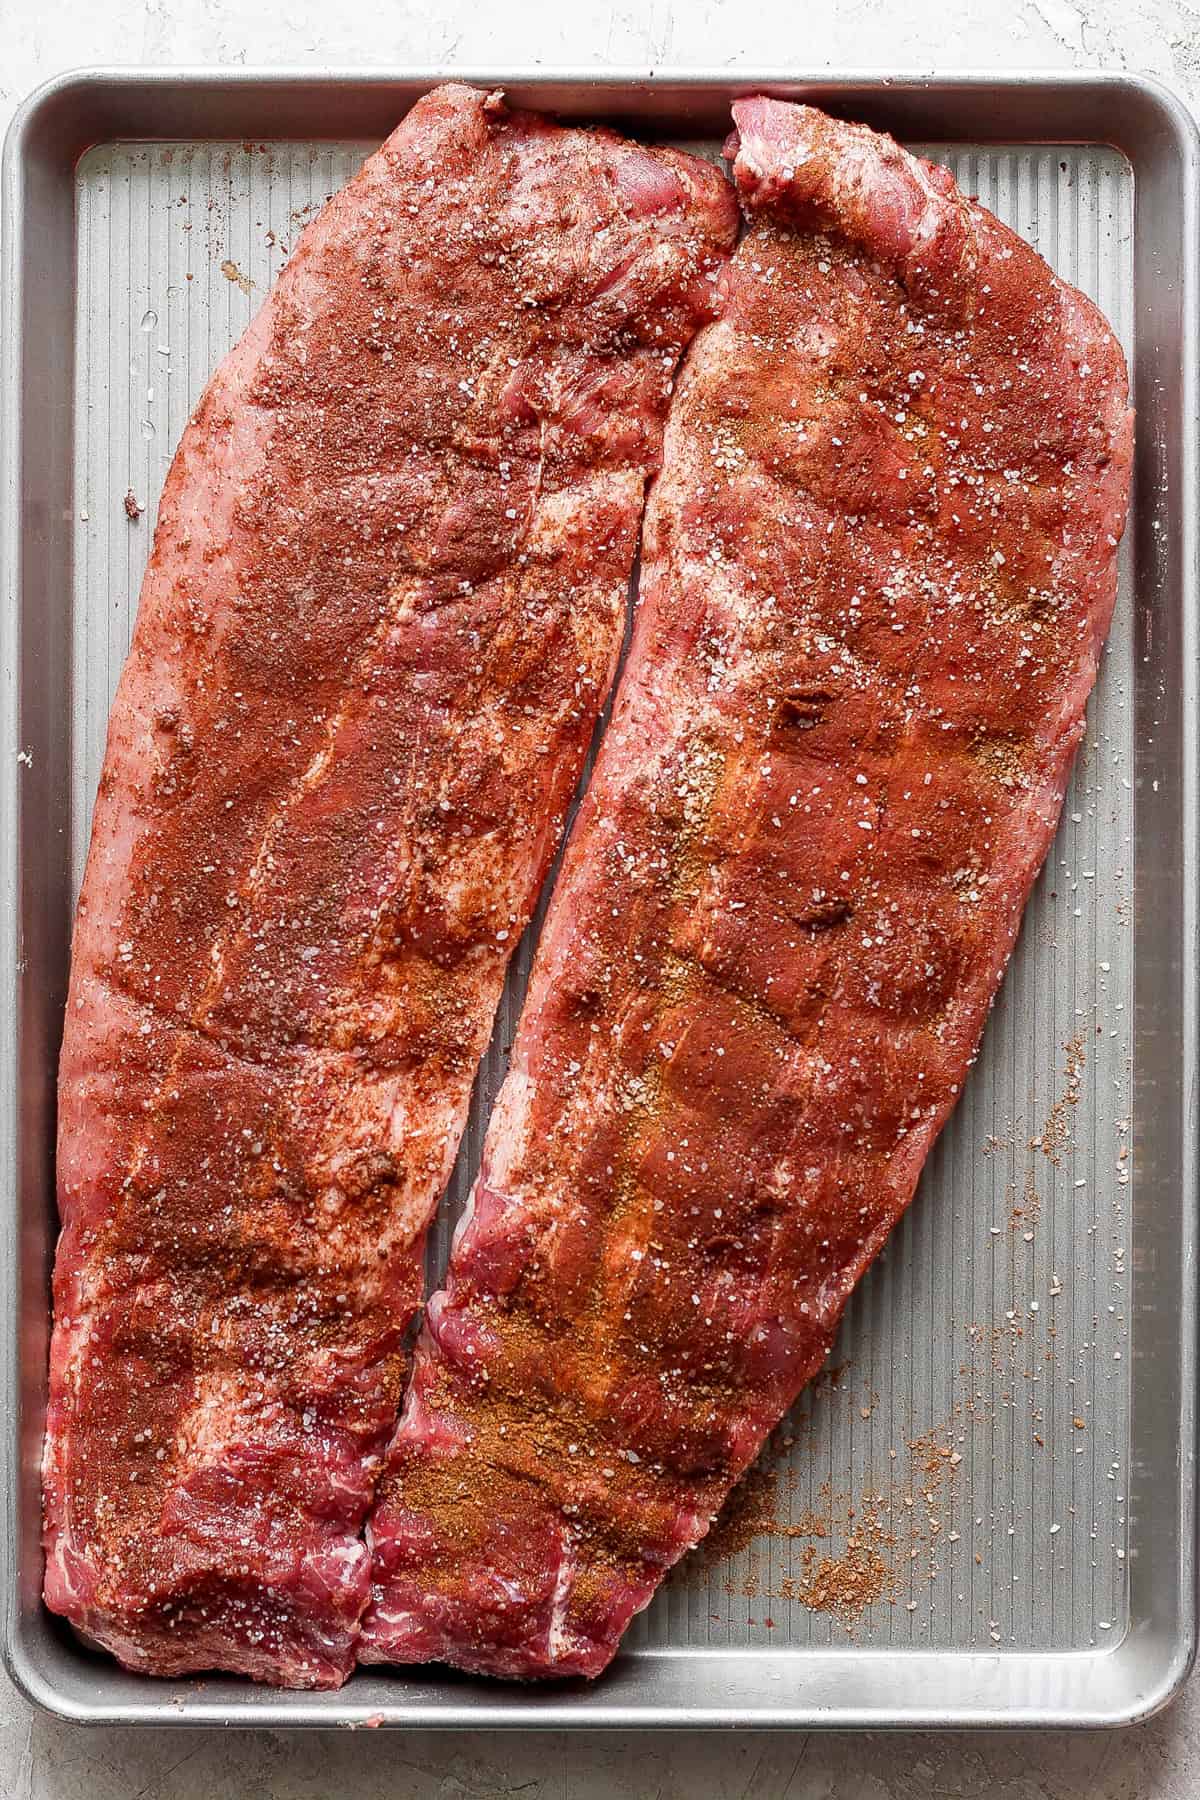 Two slabs of seasoned raw pork ribs are placed on a large rectangular baking sheet, ready for cooking.